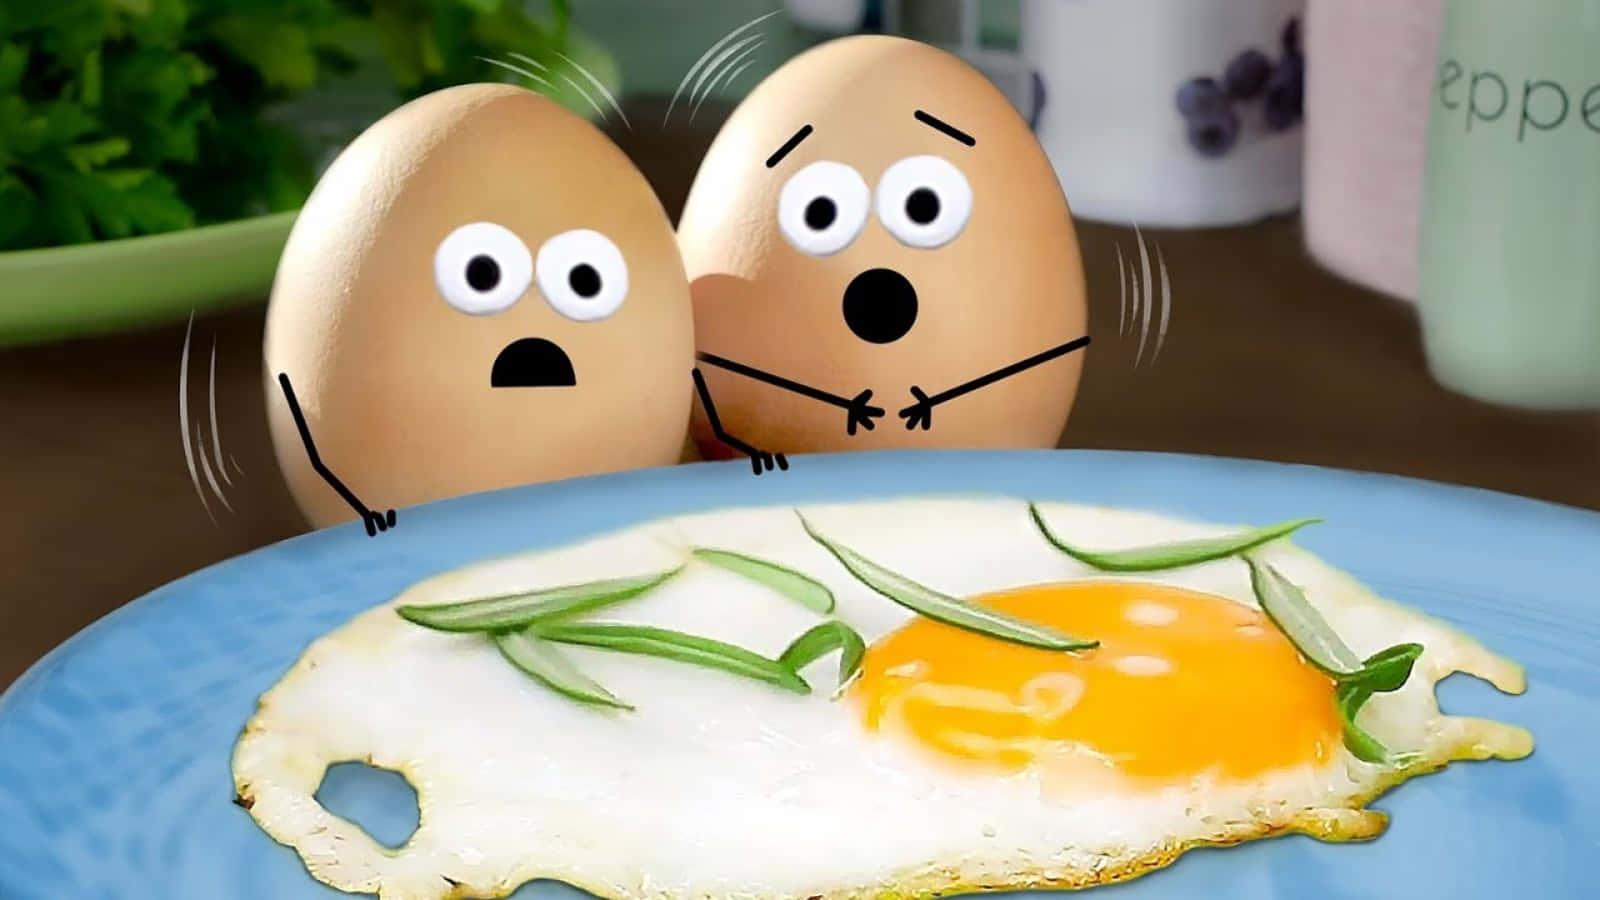 Nature's Perfect Creation - The Egg